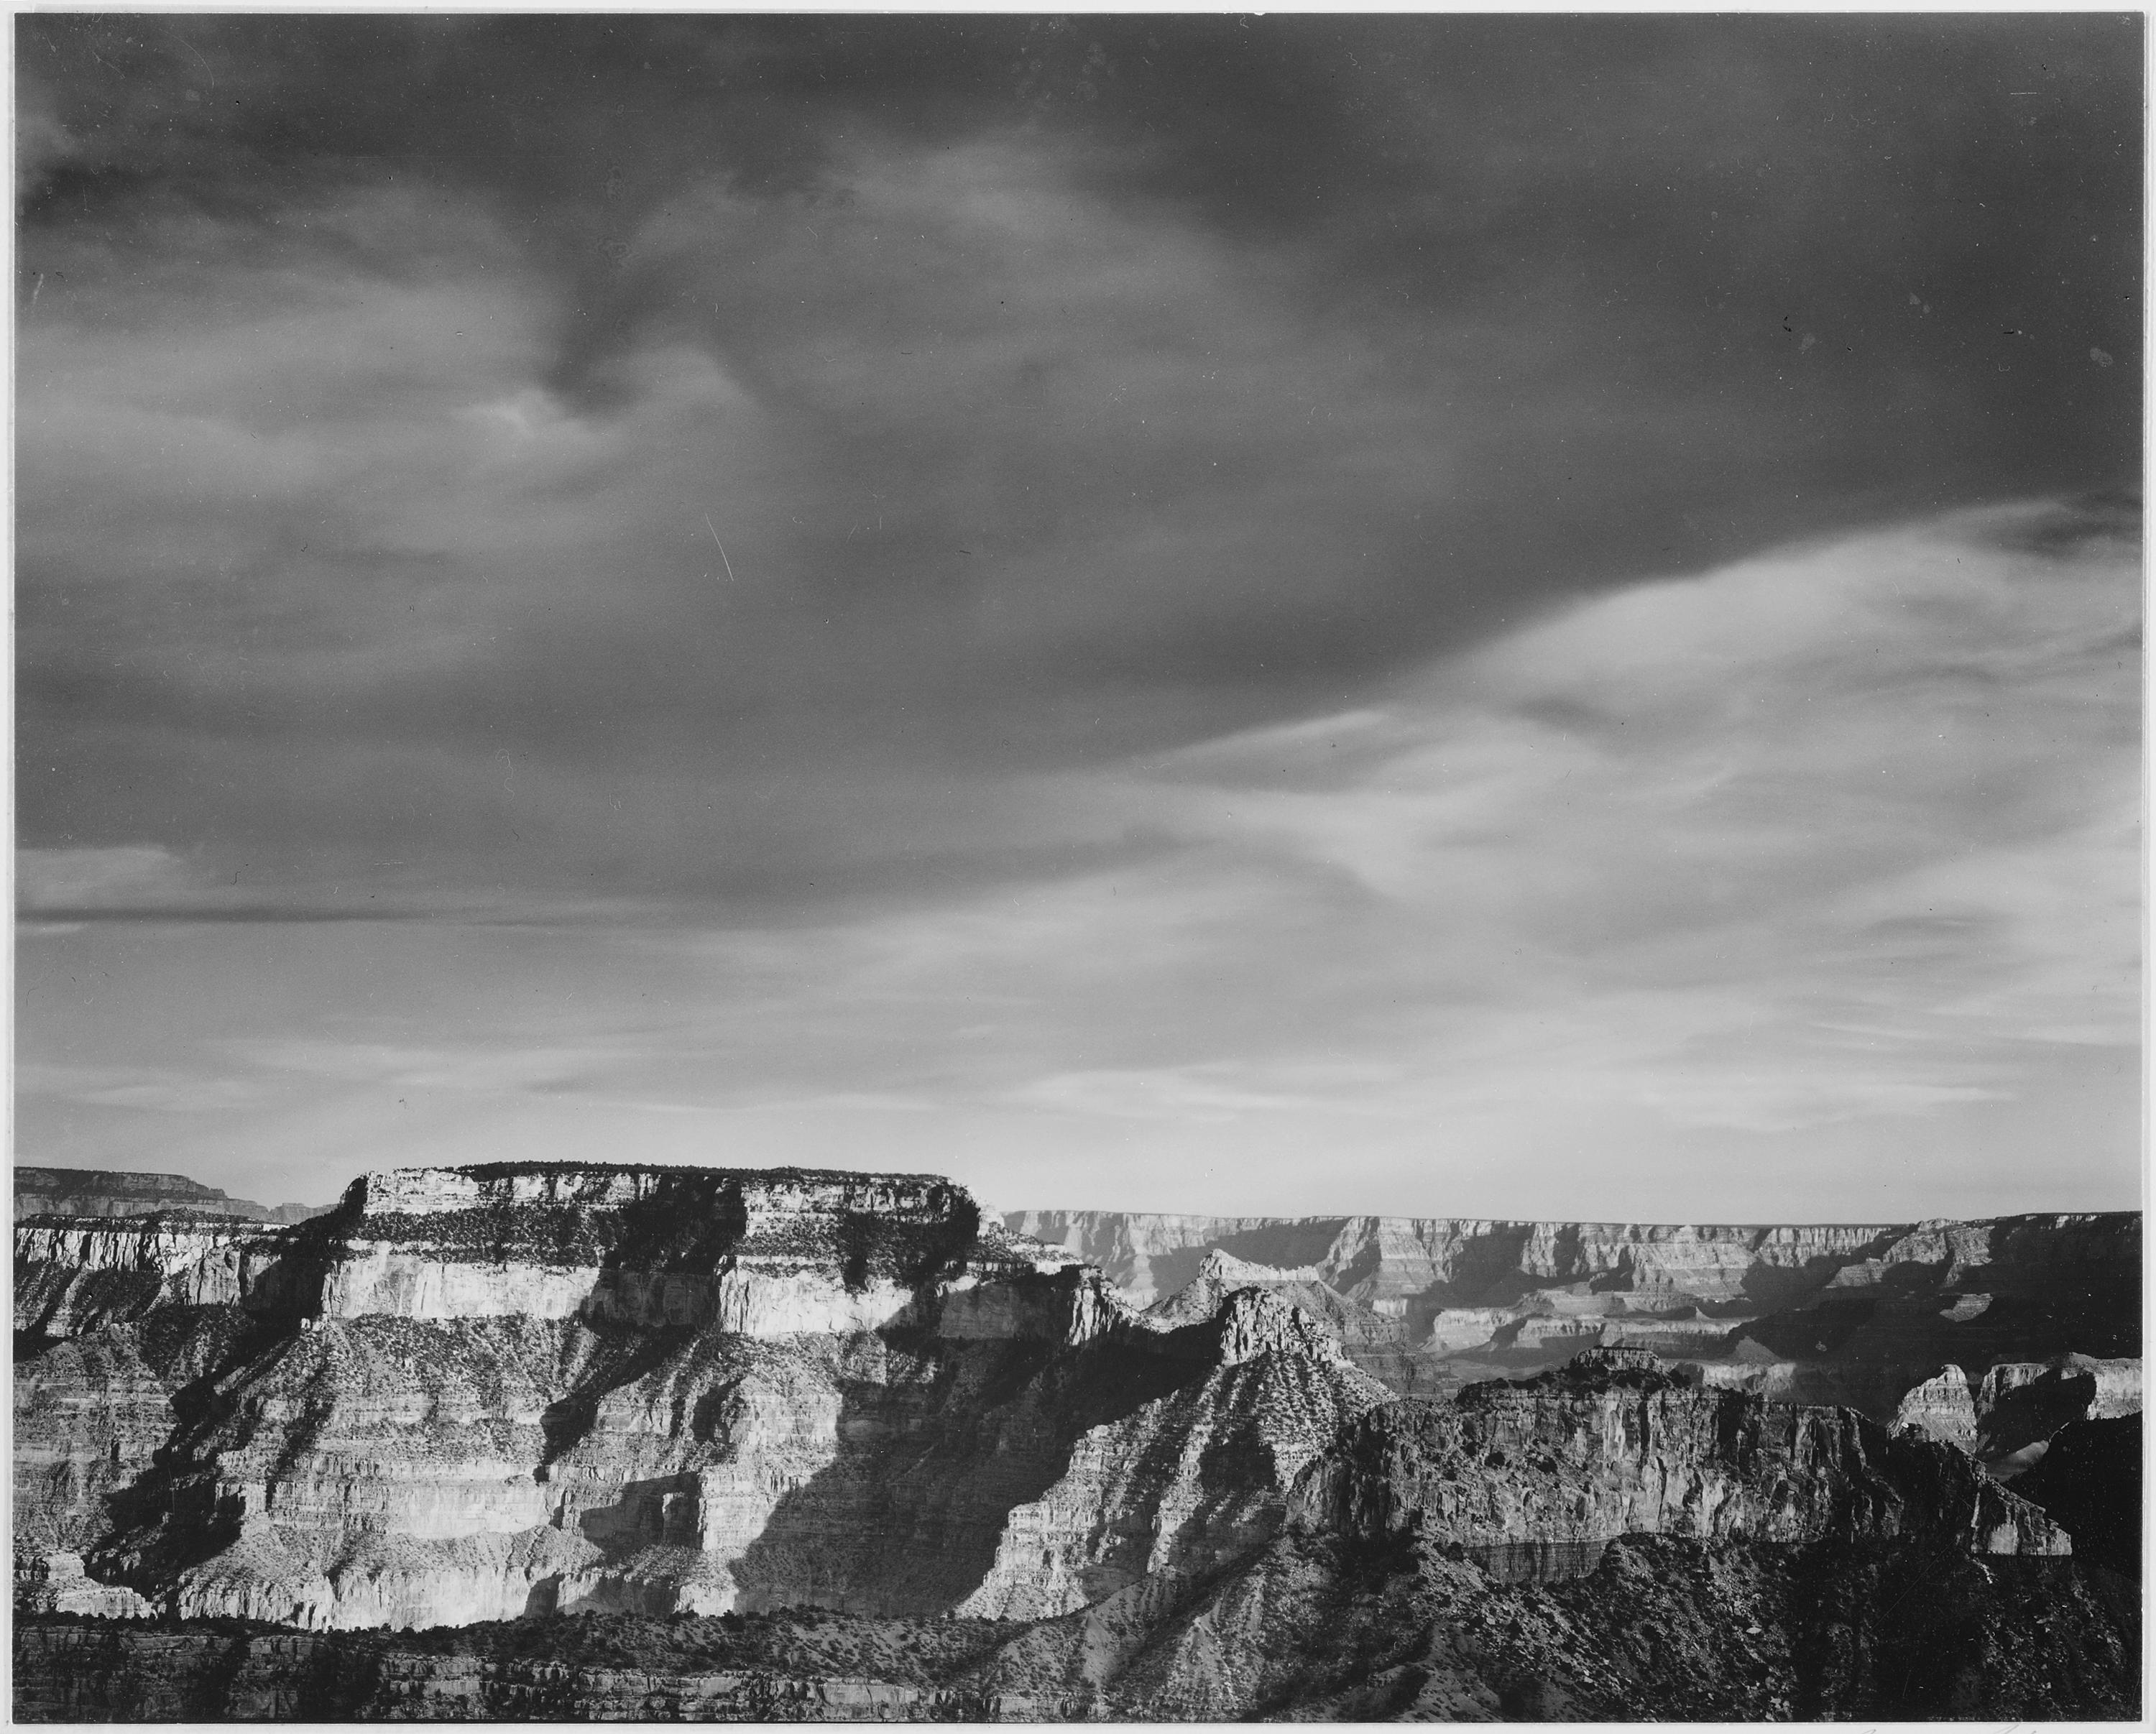 Ansel Adams - National Archives 79-AA-F13